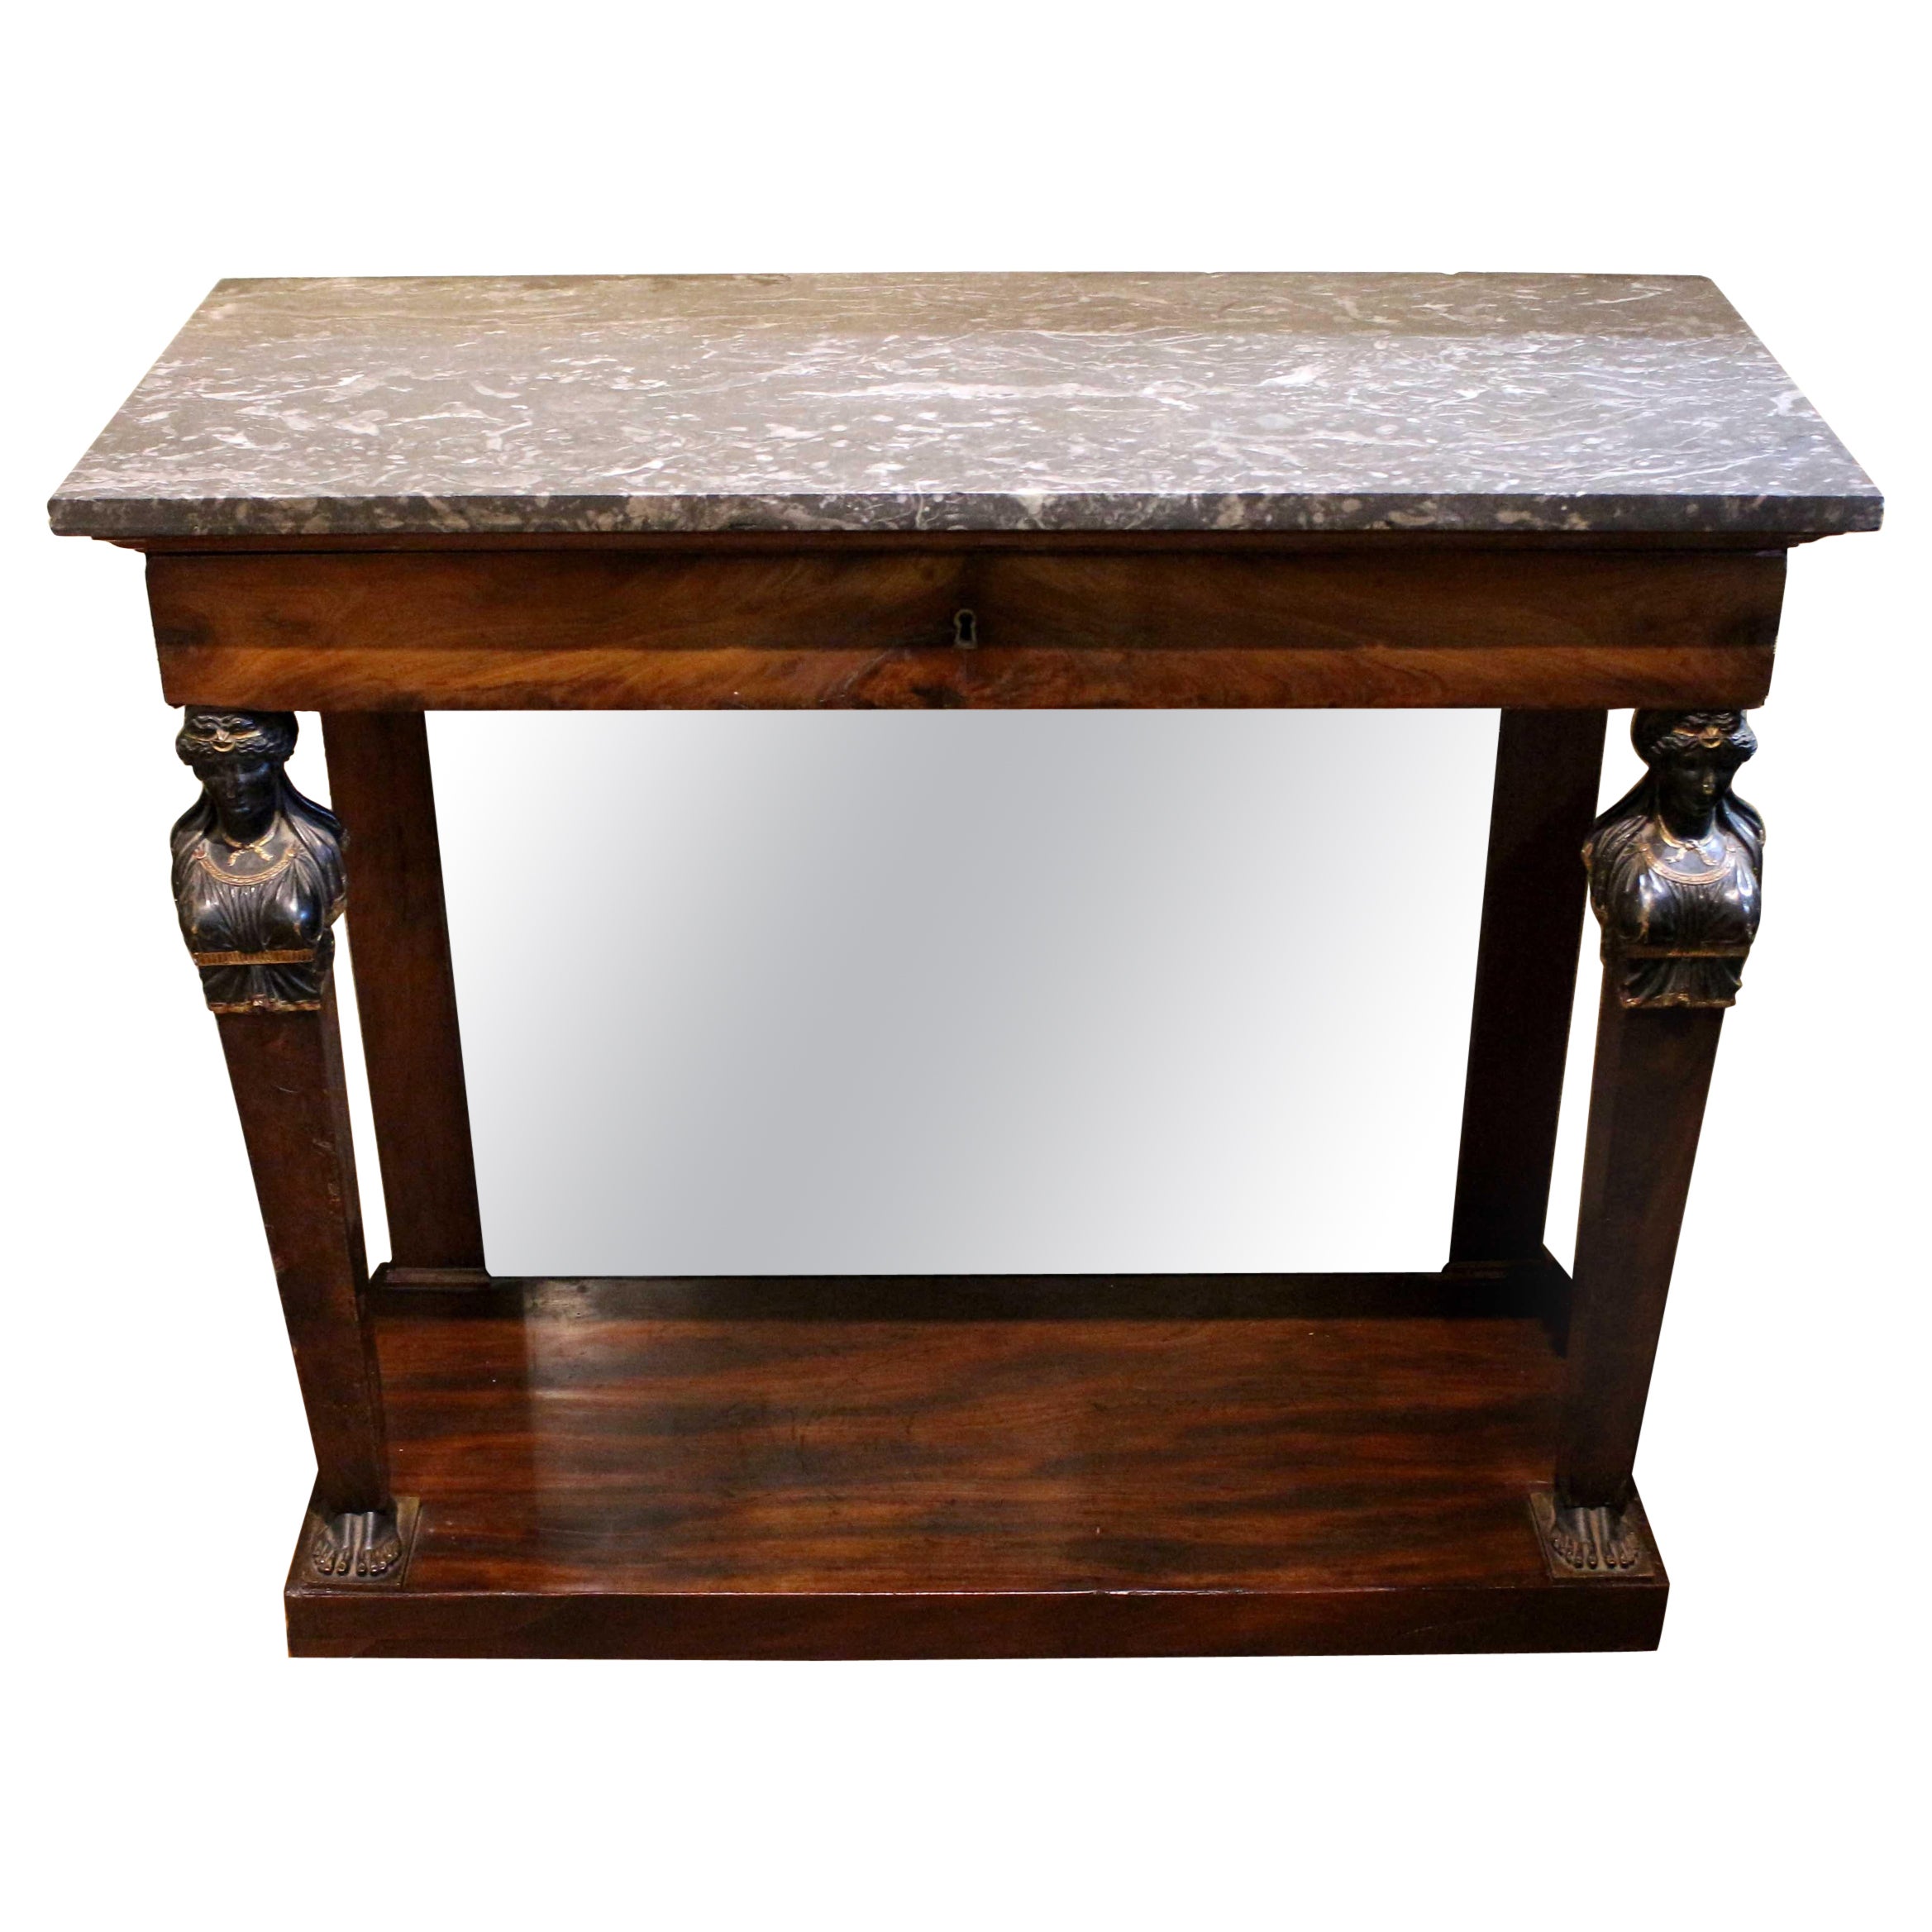 Circa 1810 Empire Period French Marble Top Console Table